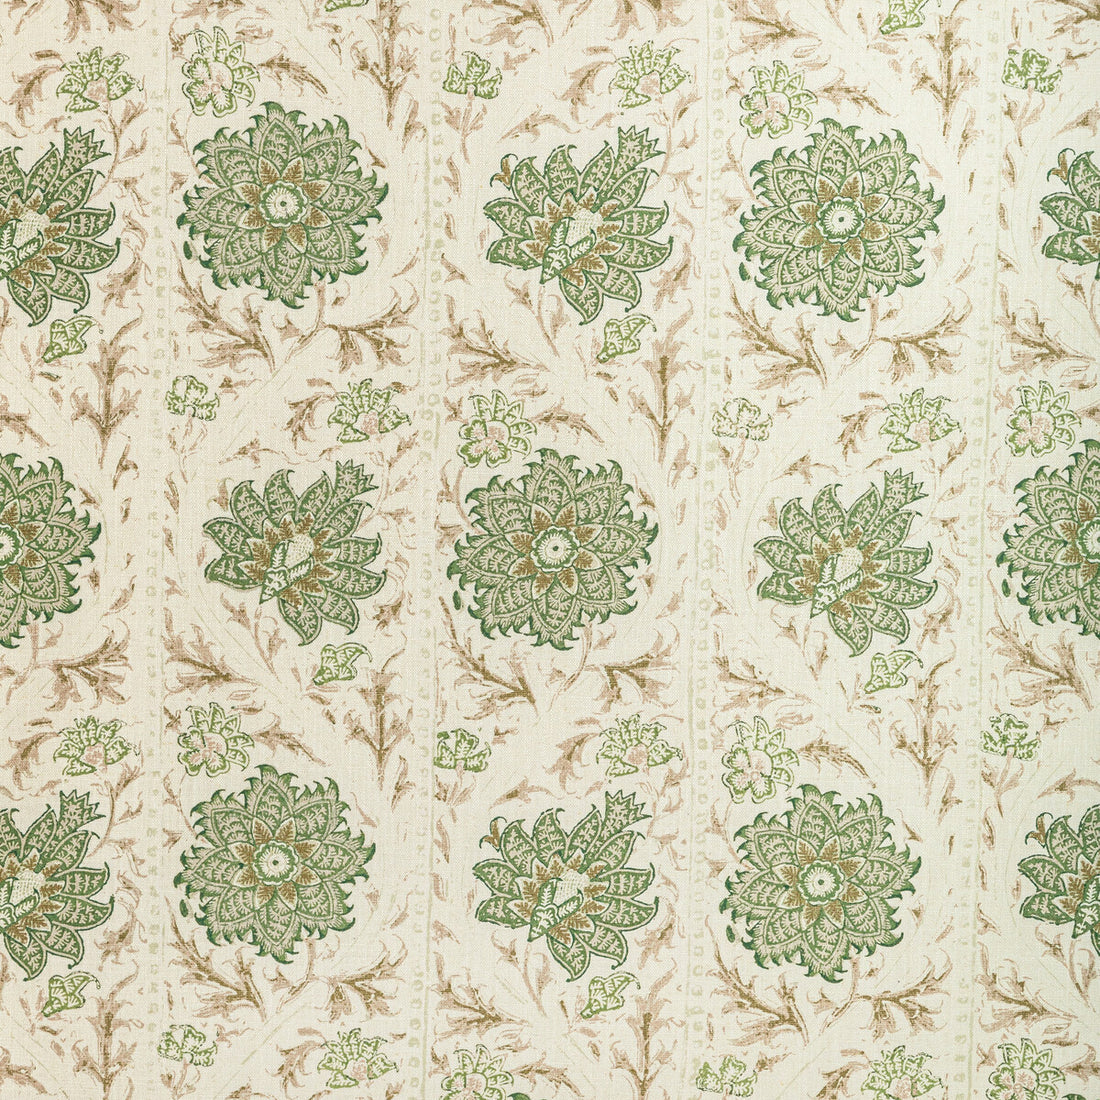 Calico Vine fabric in greenery color - pattern 2022102.316.0 - by Lee Jofa in the Sarah Bartholomew collection